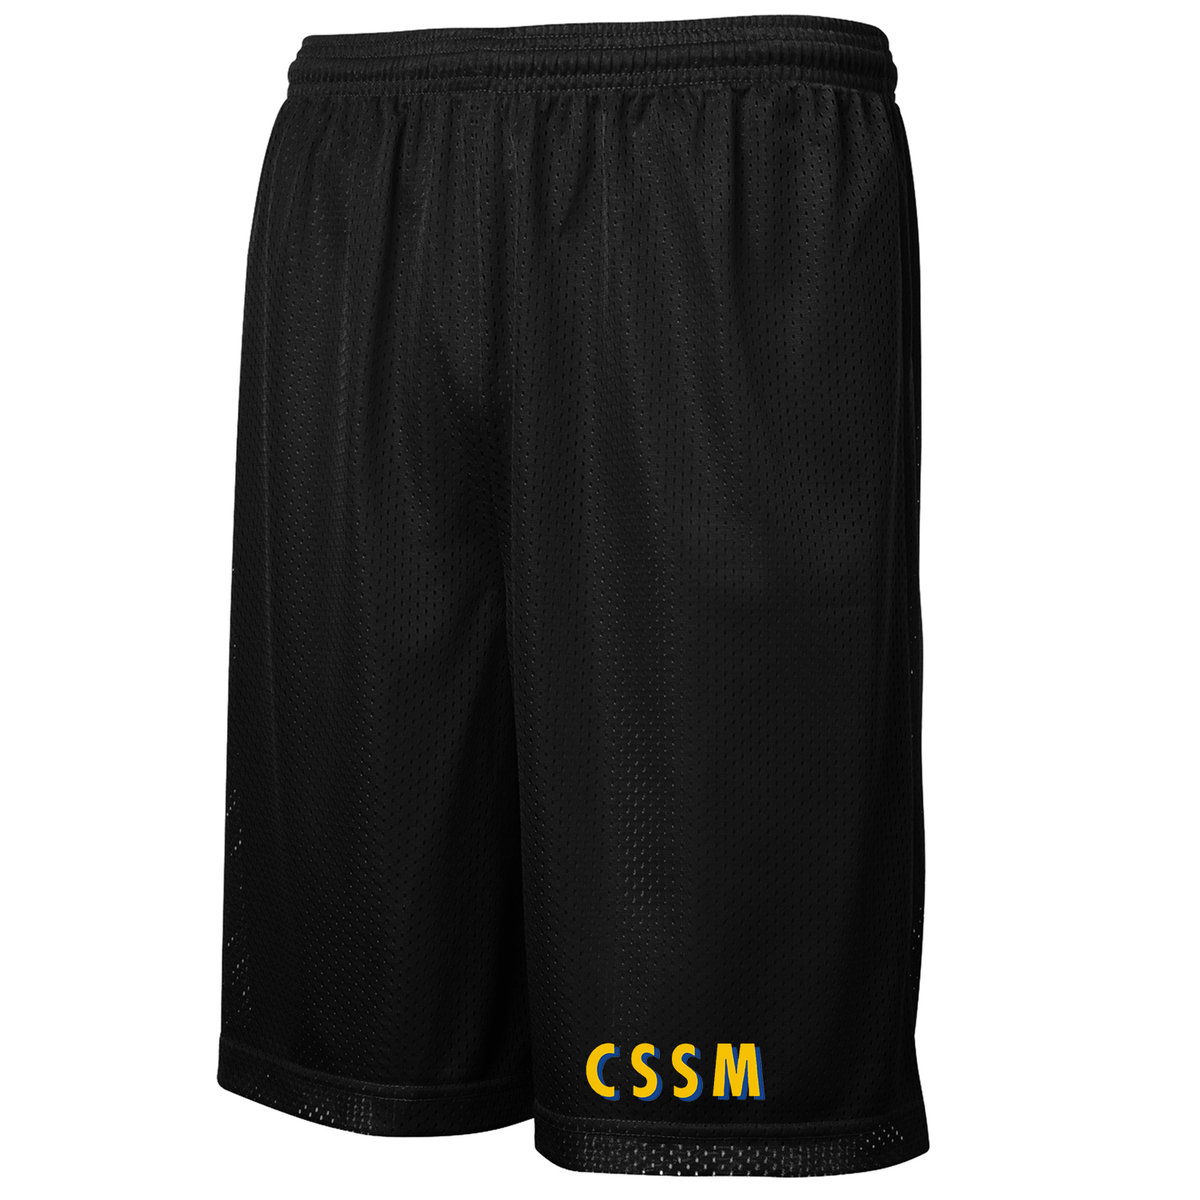 Cleveland School of Science and Medicine Classic Mesh Shorts